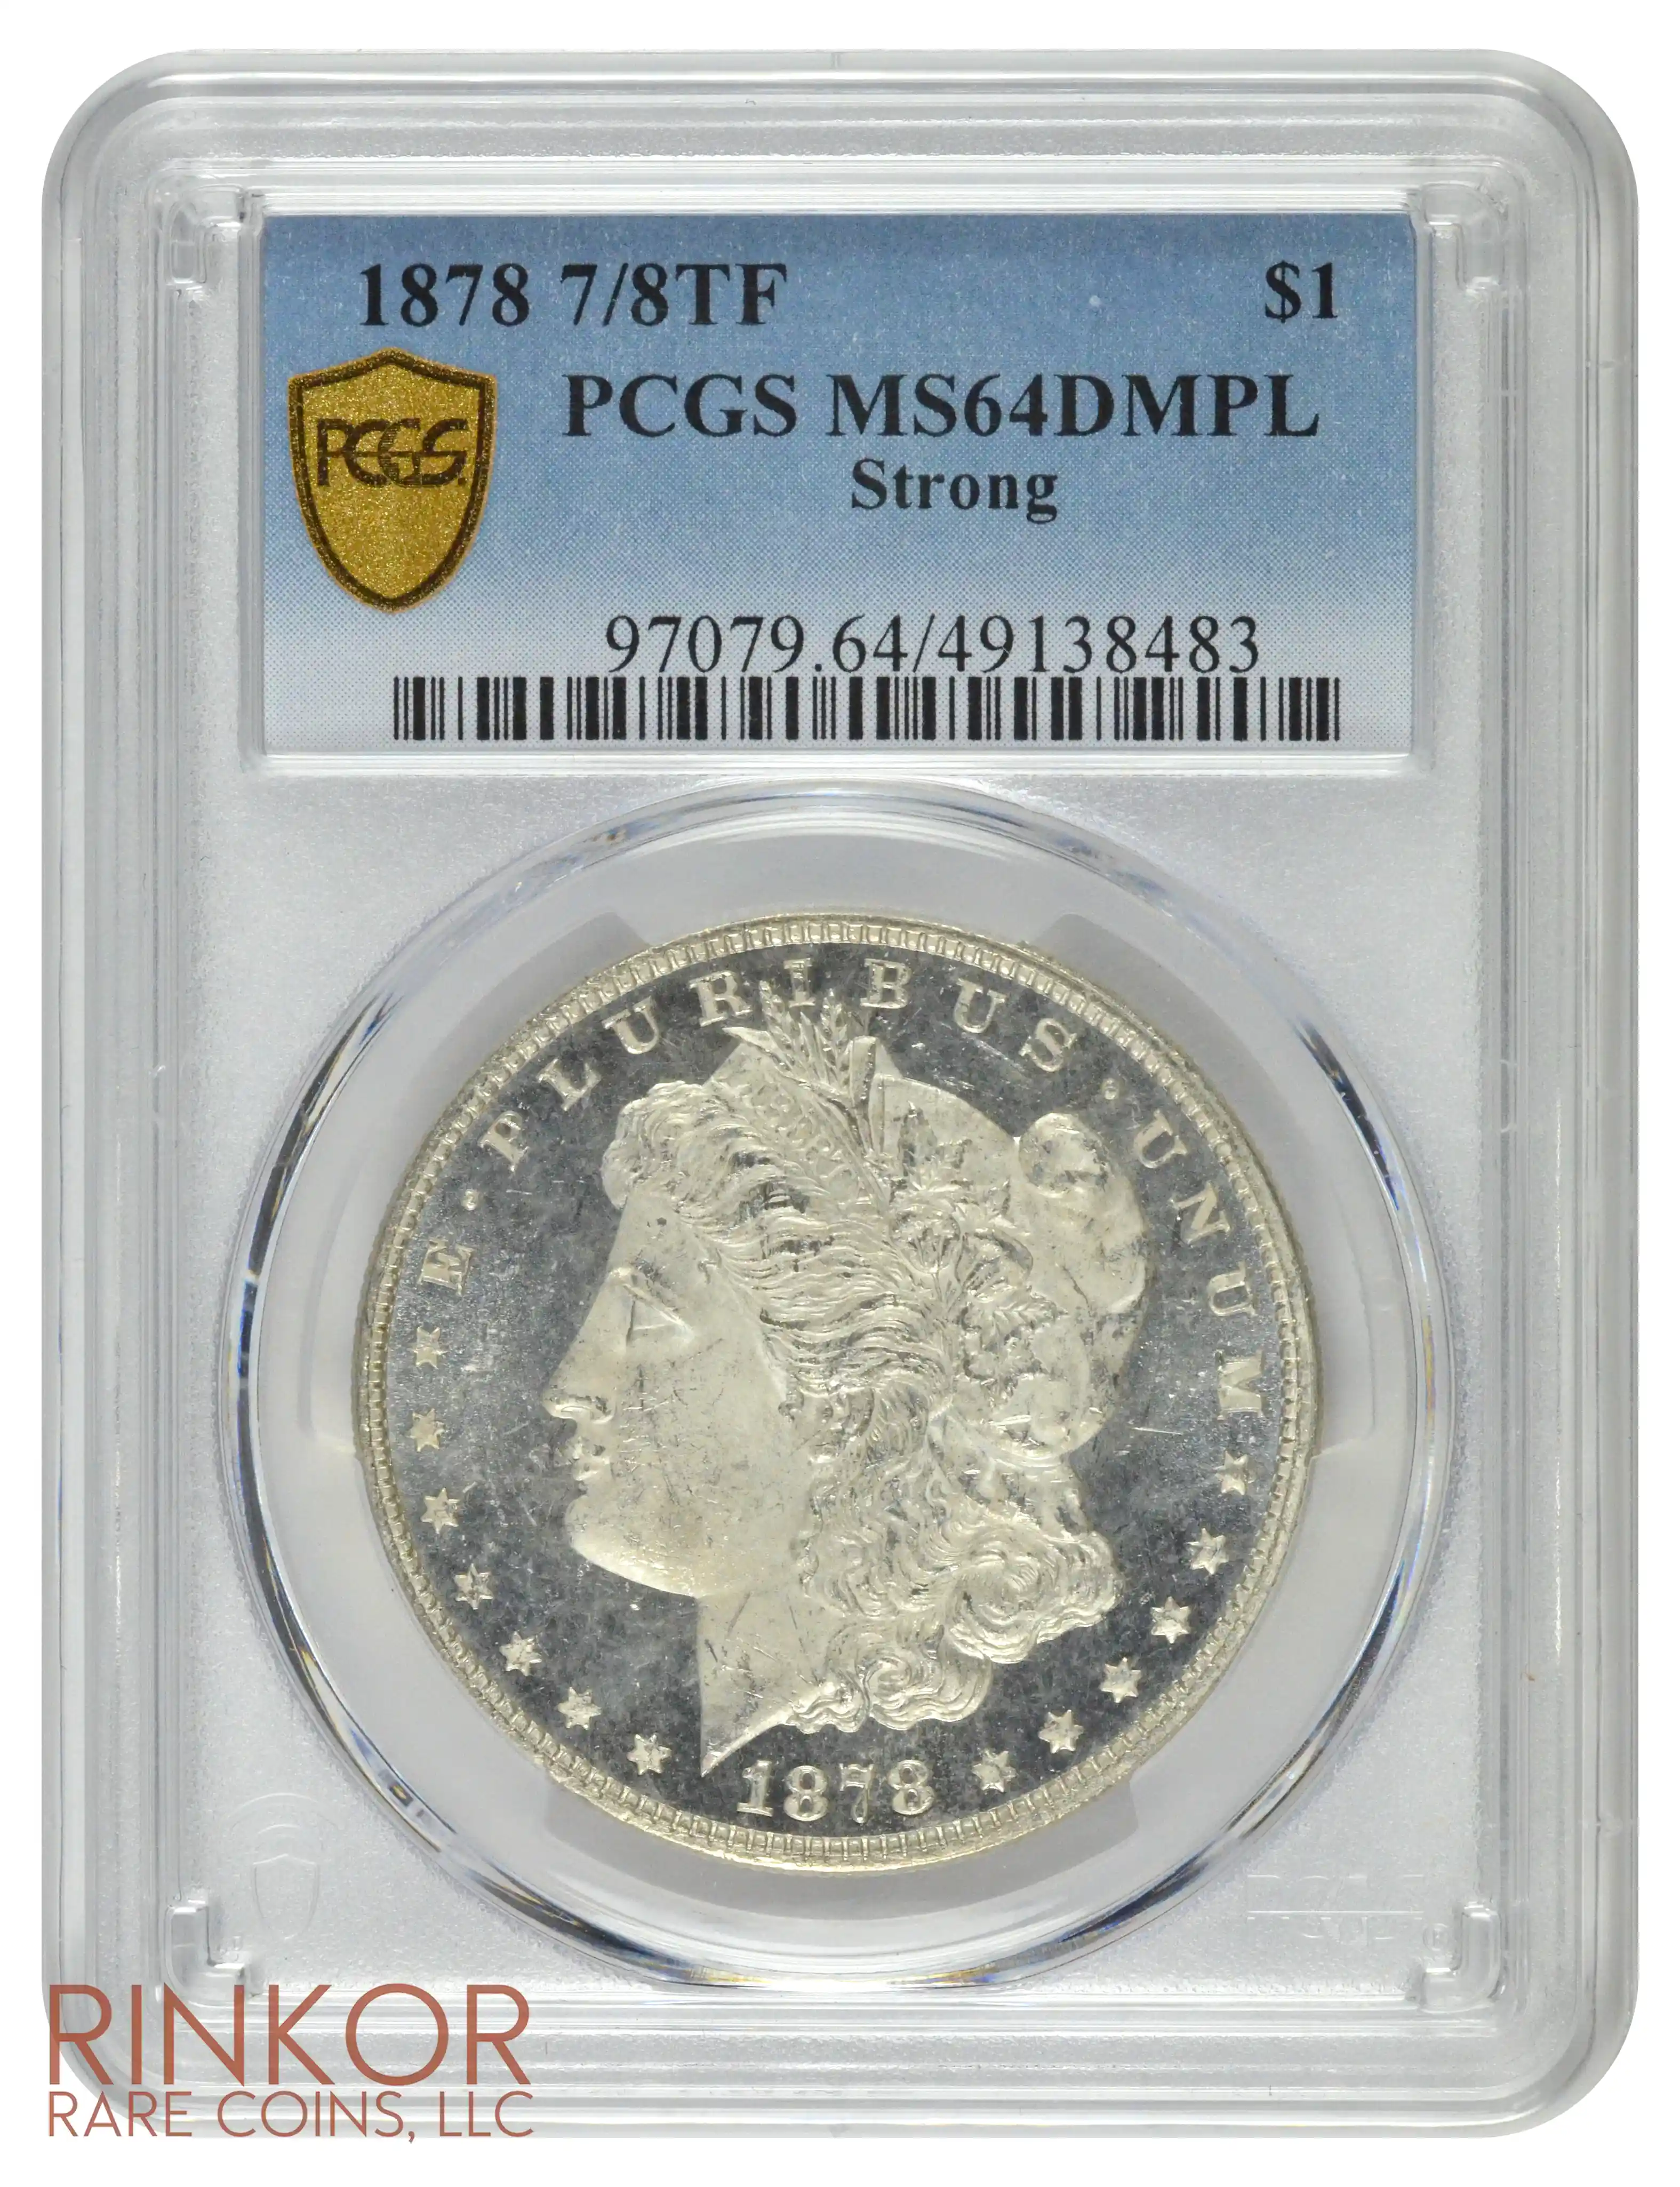 1878 7/8TF $1 Strong PCGS MS 64 DMPL 